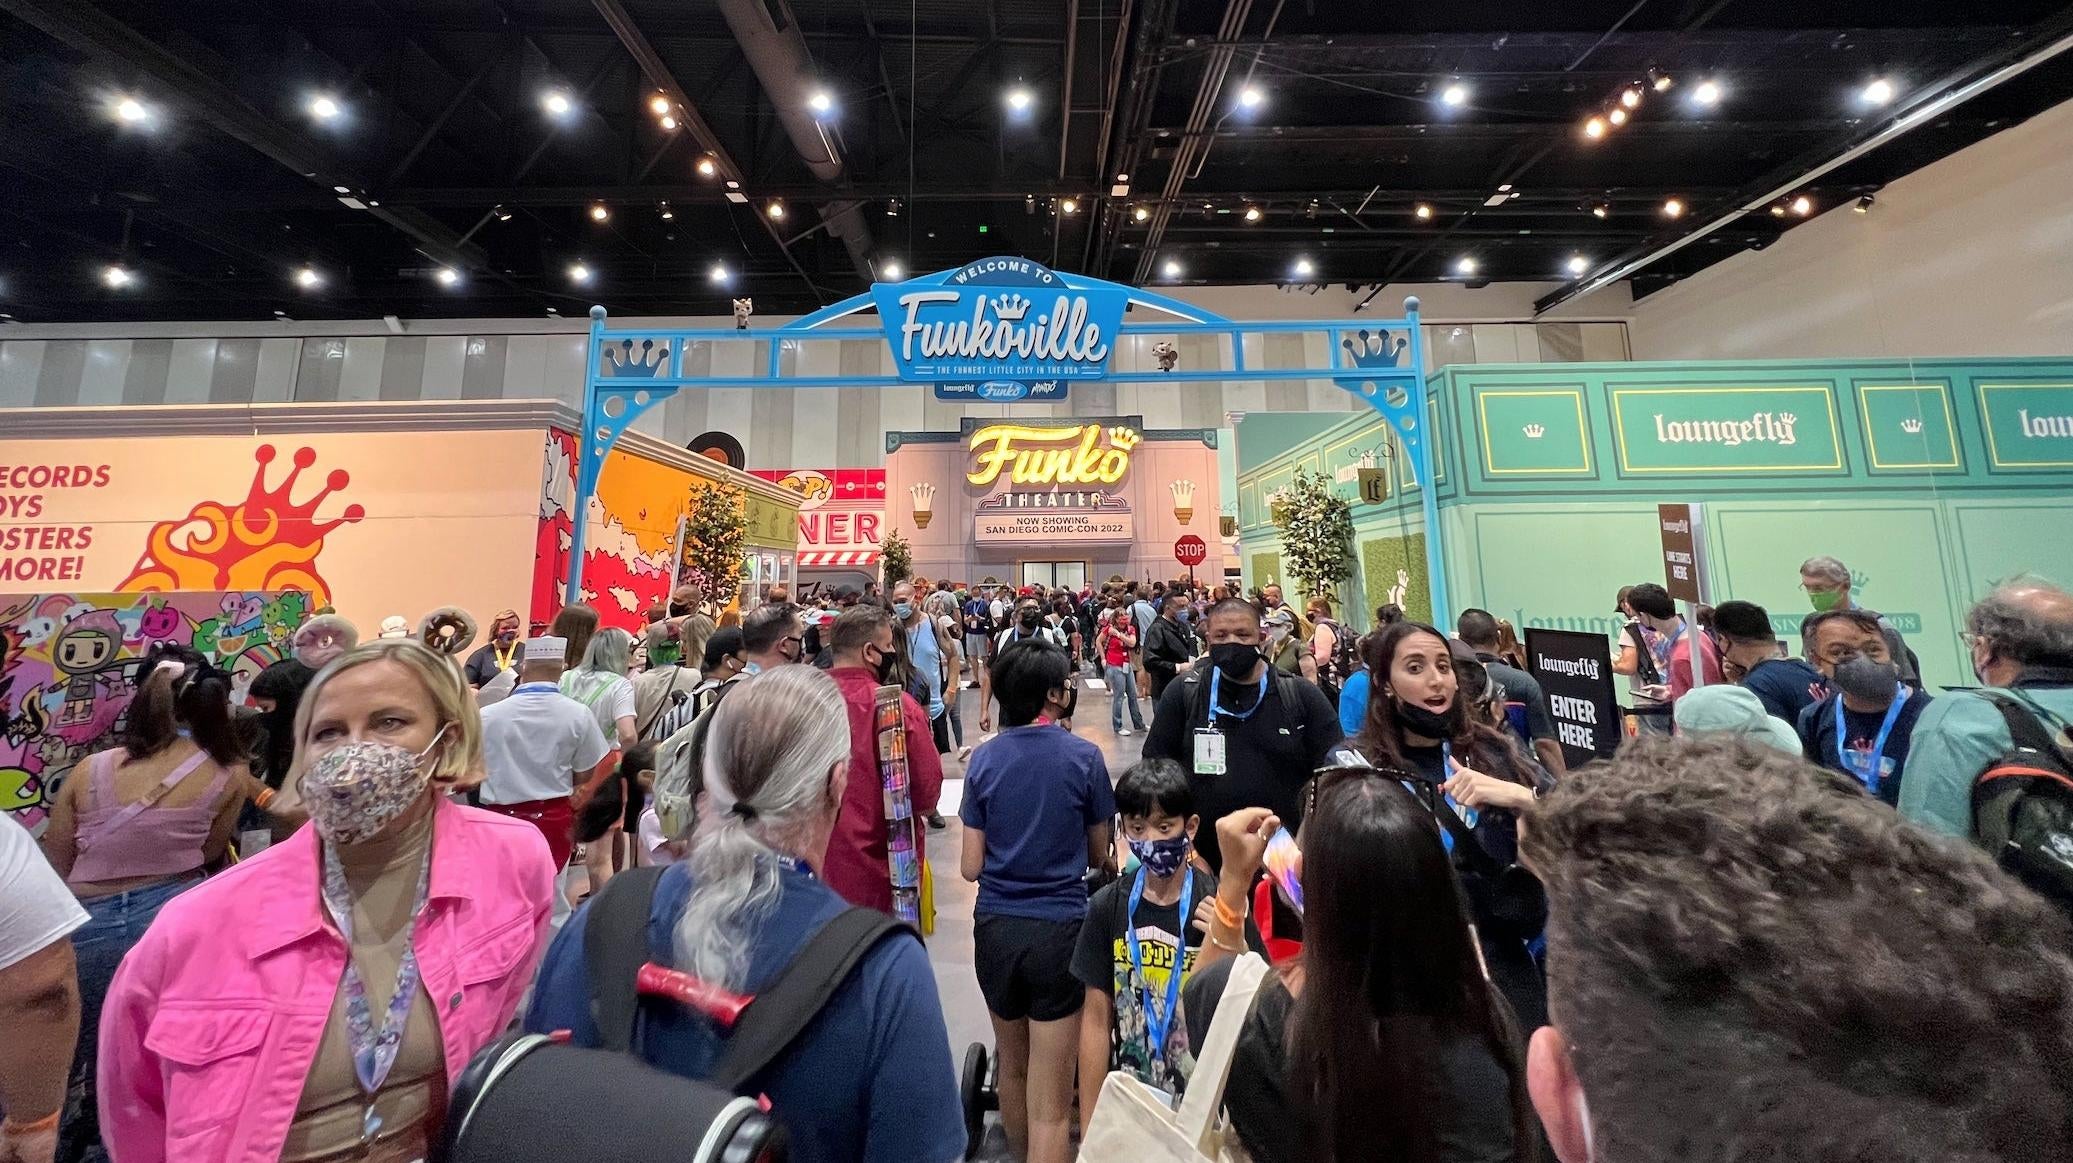 Crowds going into Funkoville. Mondo is on the left. (Photo: Gizmodo/Germain Lussier)